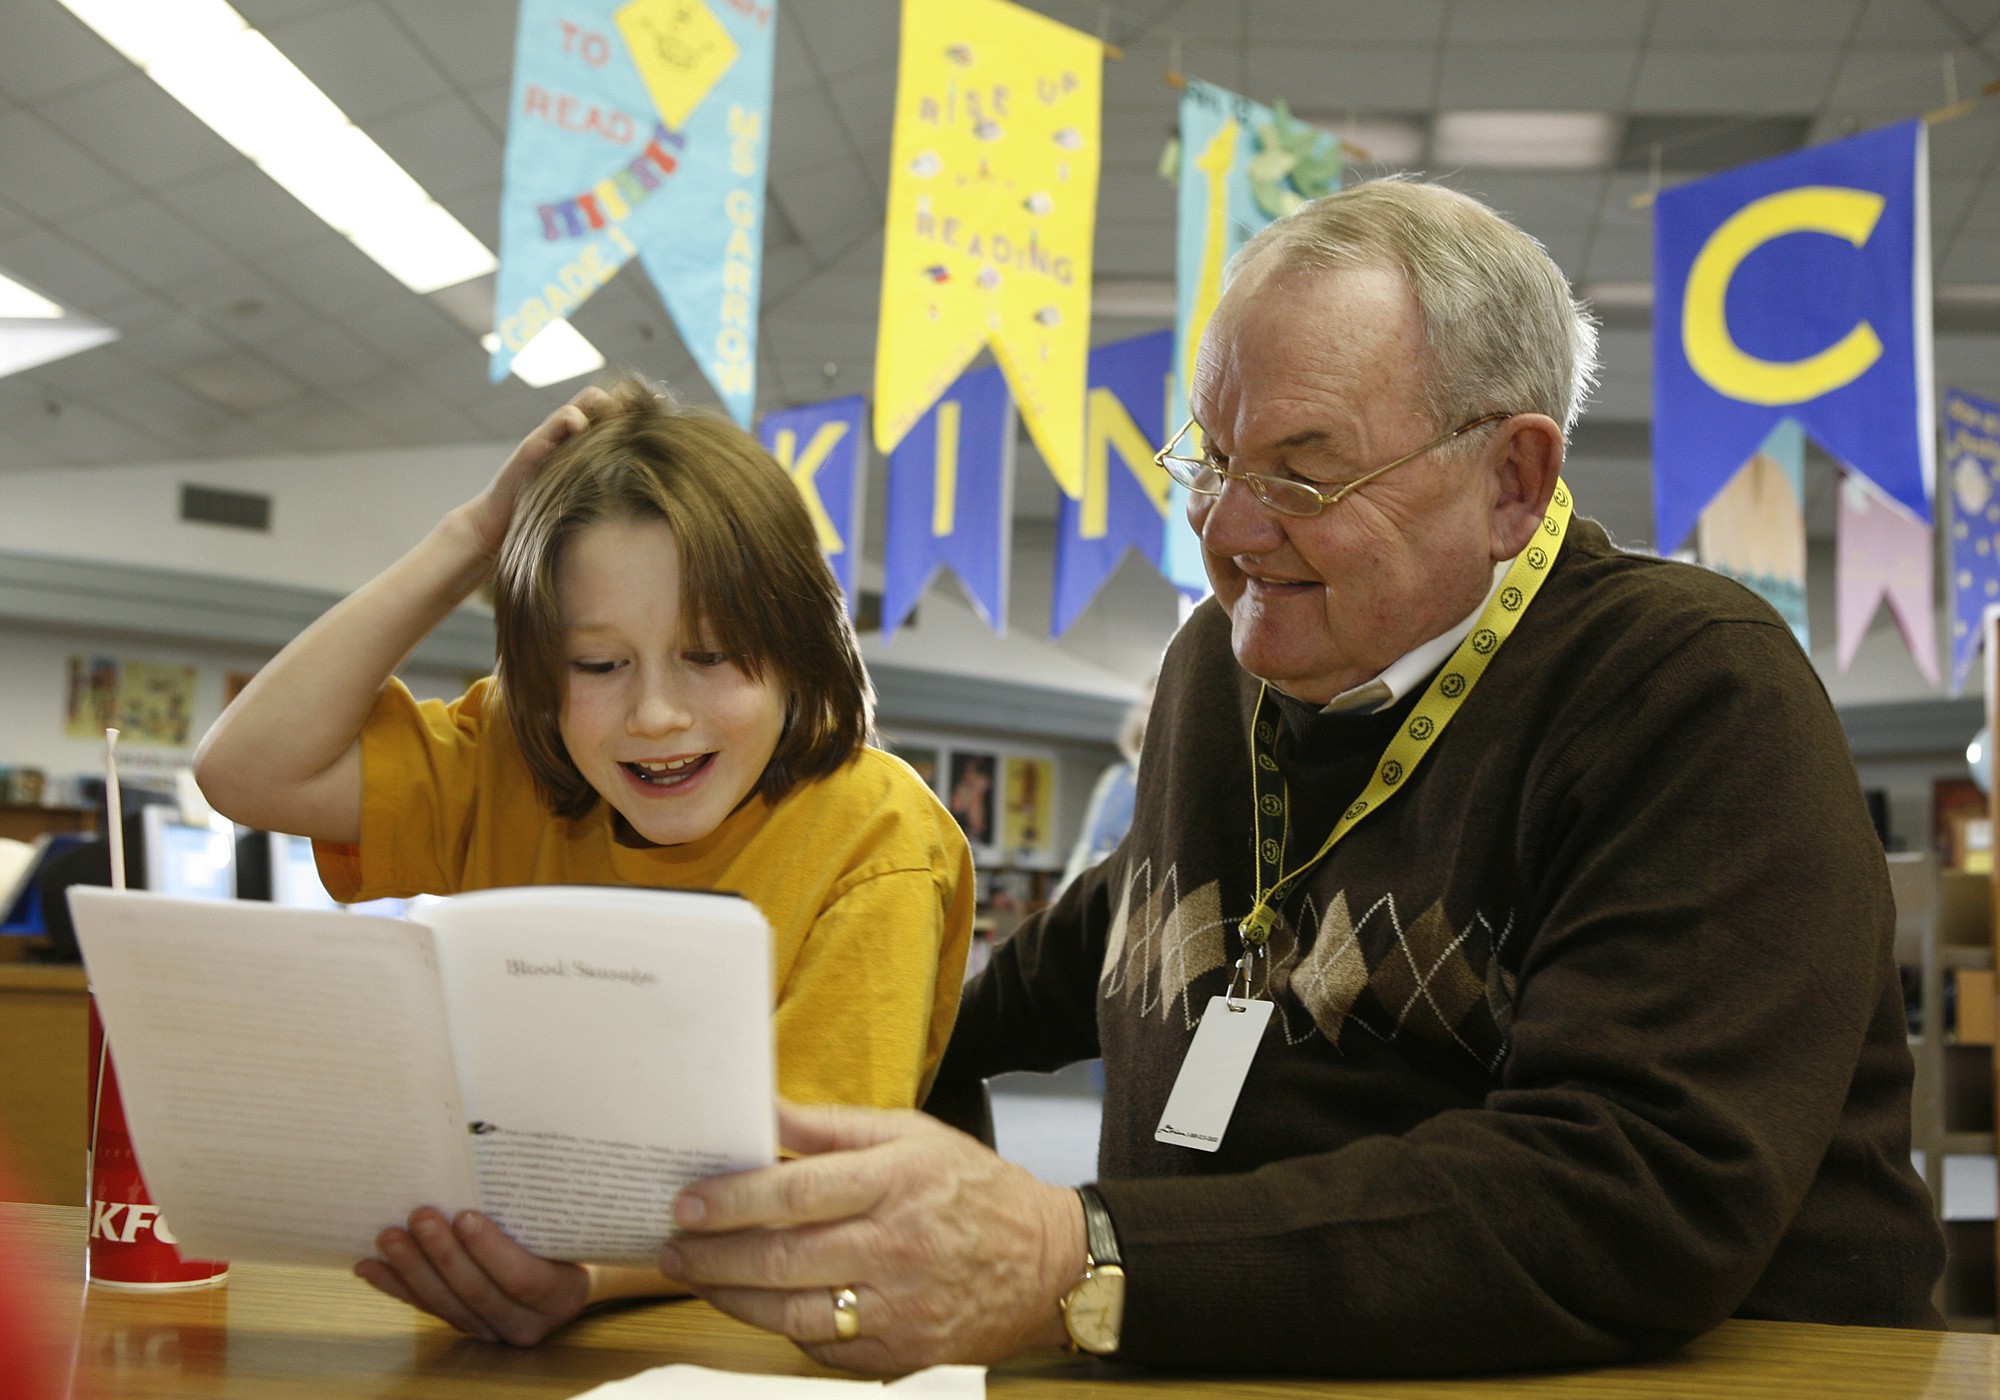 Seth Hunt, then a fifth-grader at Martin Luther King Elementary School in Vancouver, reads a passage from &quot;Blood Sausage,&quot; a story by Patrick McManus, in February 2008 with Steve Runyan, a Lunch Buddy volunteer. The two had been lunch buddies since Seth was in third grade.